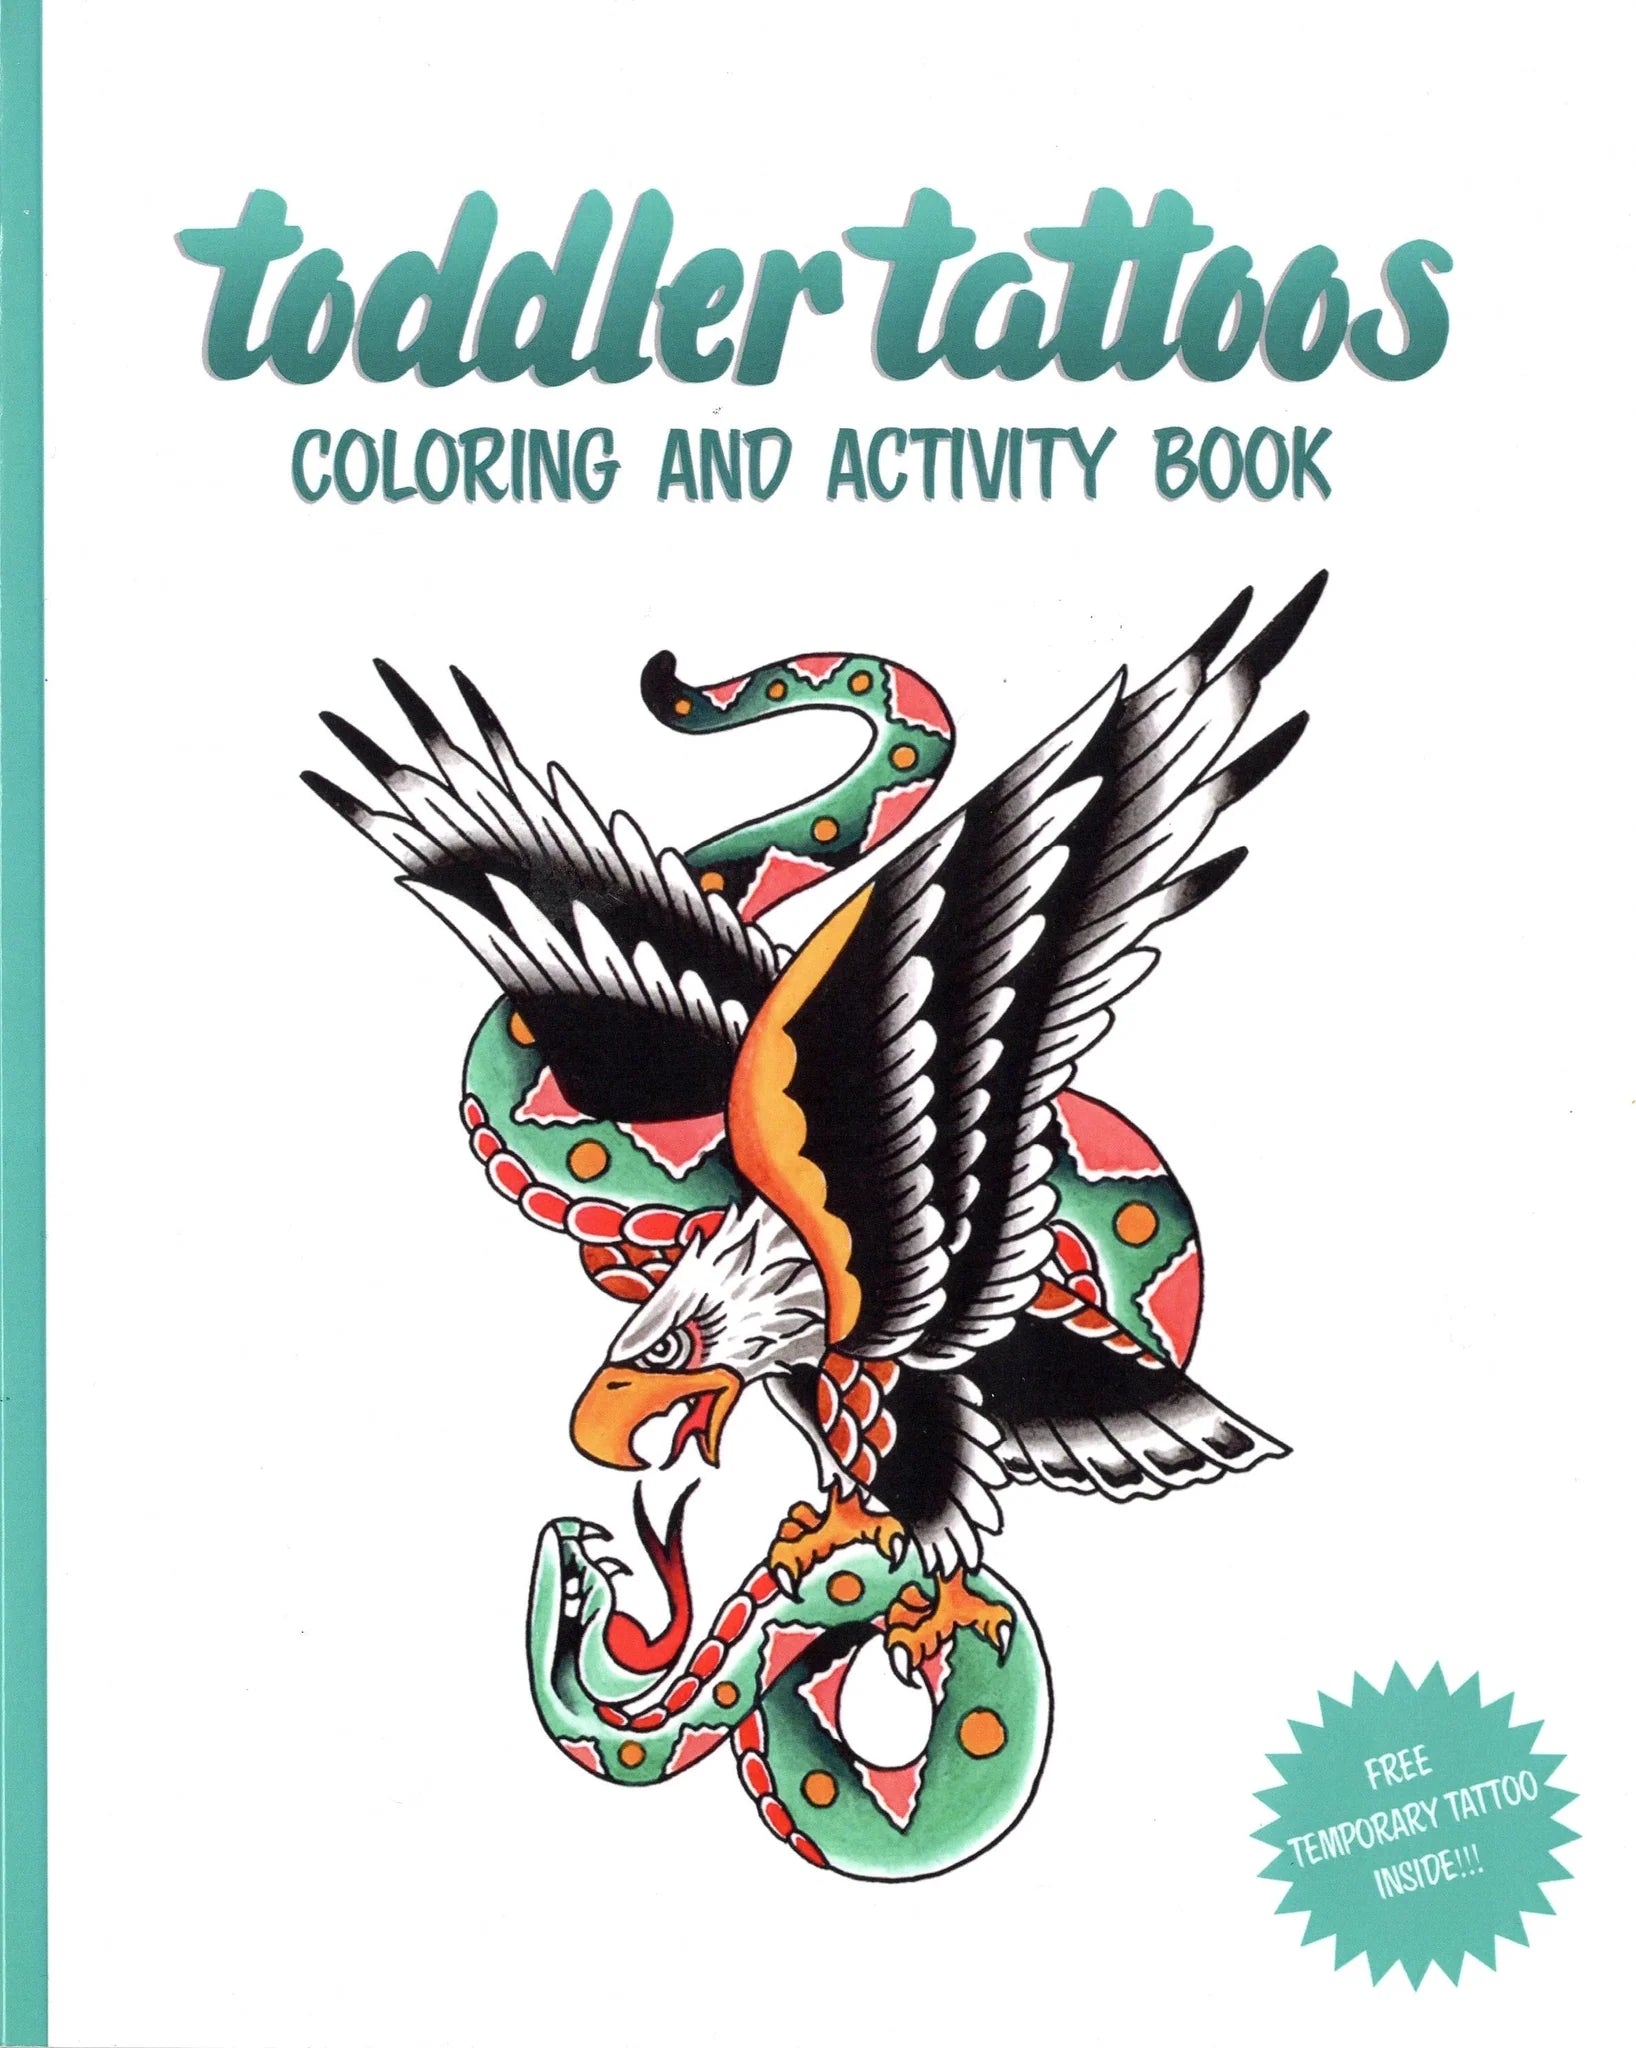 Toddler Tattoos Coloring and Activity Book Vol.1 And Temporary Tattoos